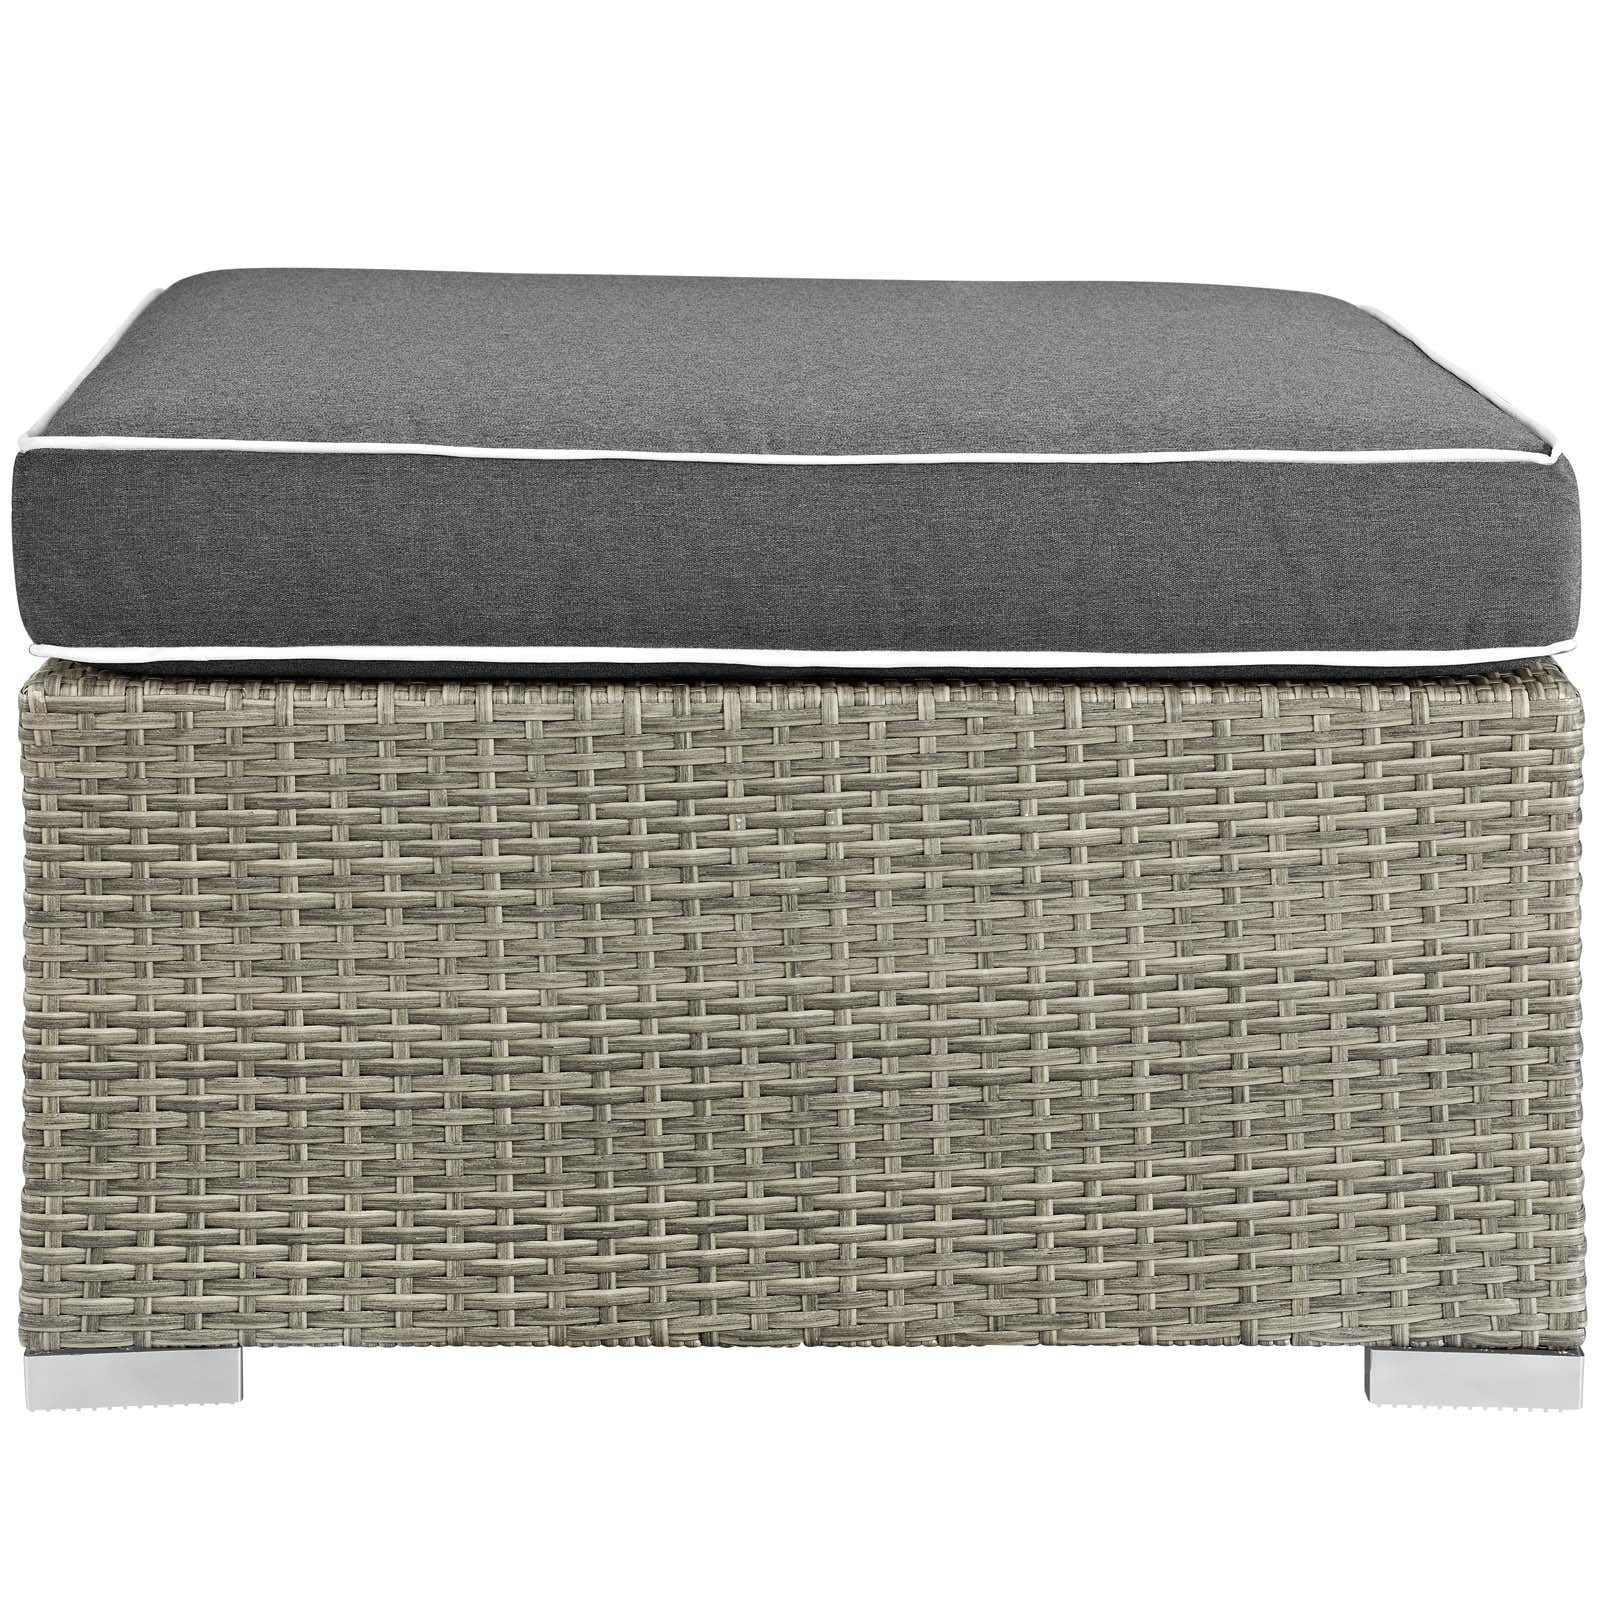 Modway Outdoor Stools & Benches - Repose Outdoor Patio Upholstered Fabric Ottoman Light Gray Charcoal